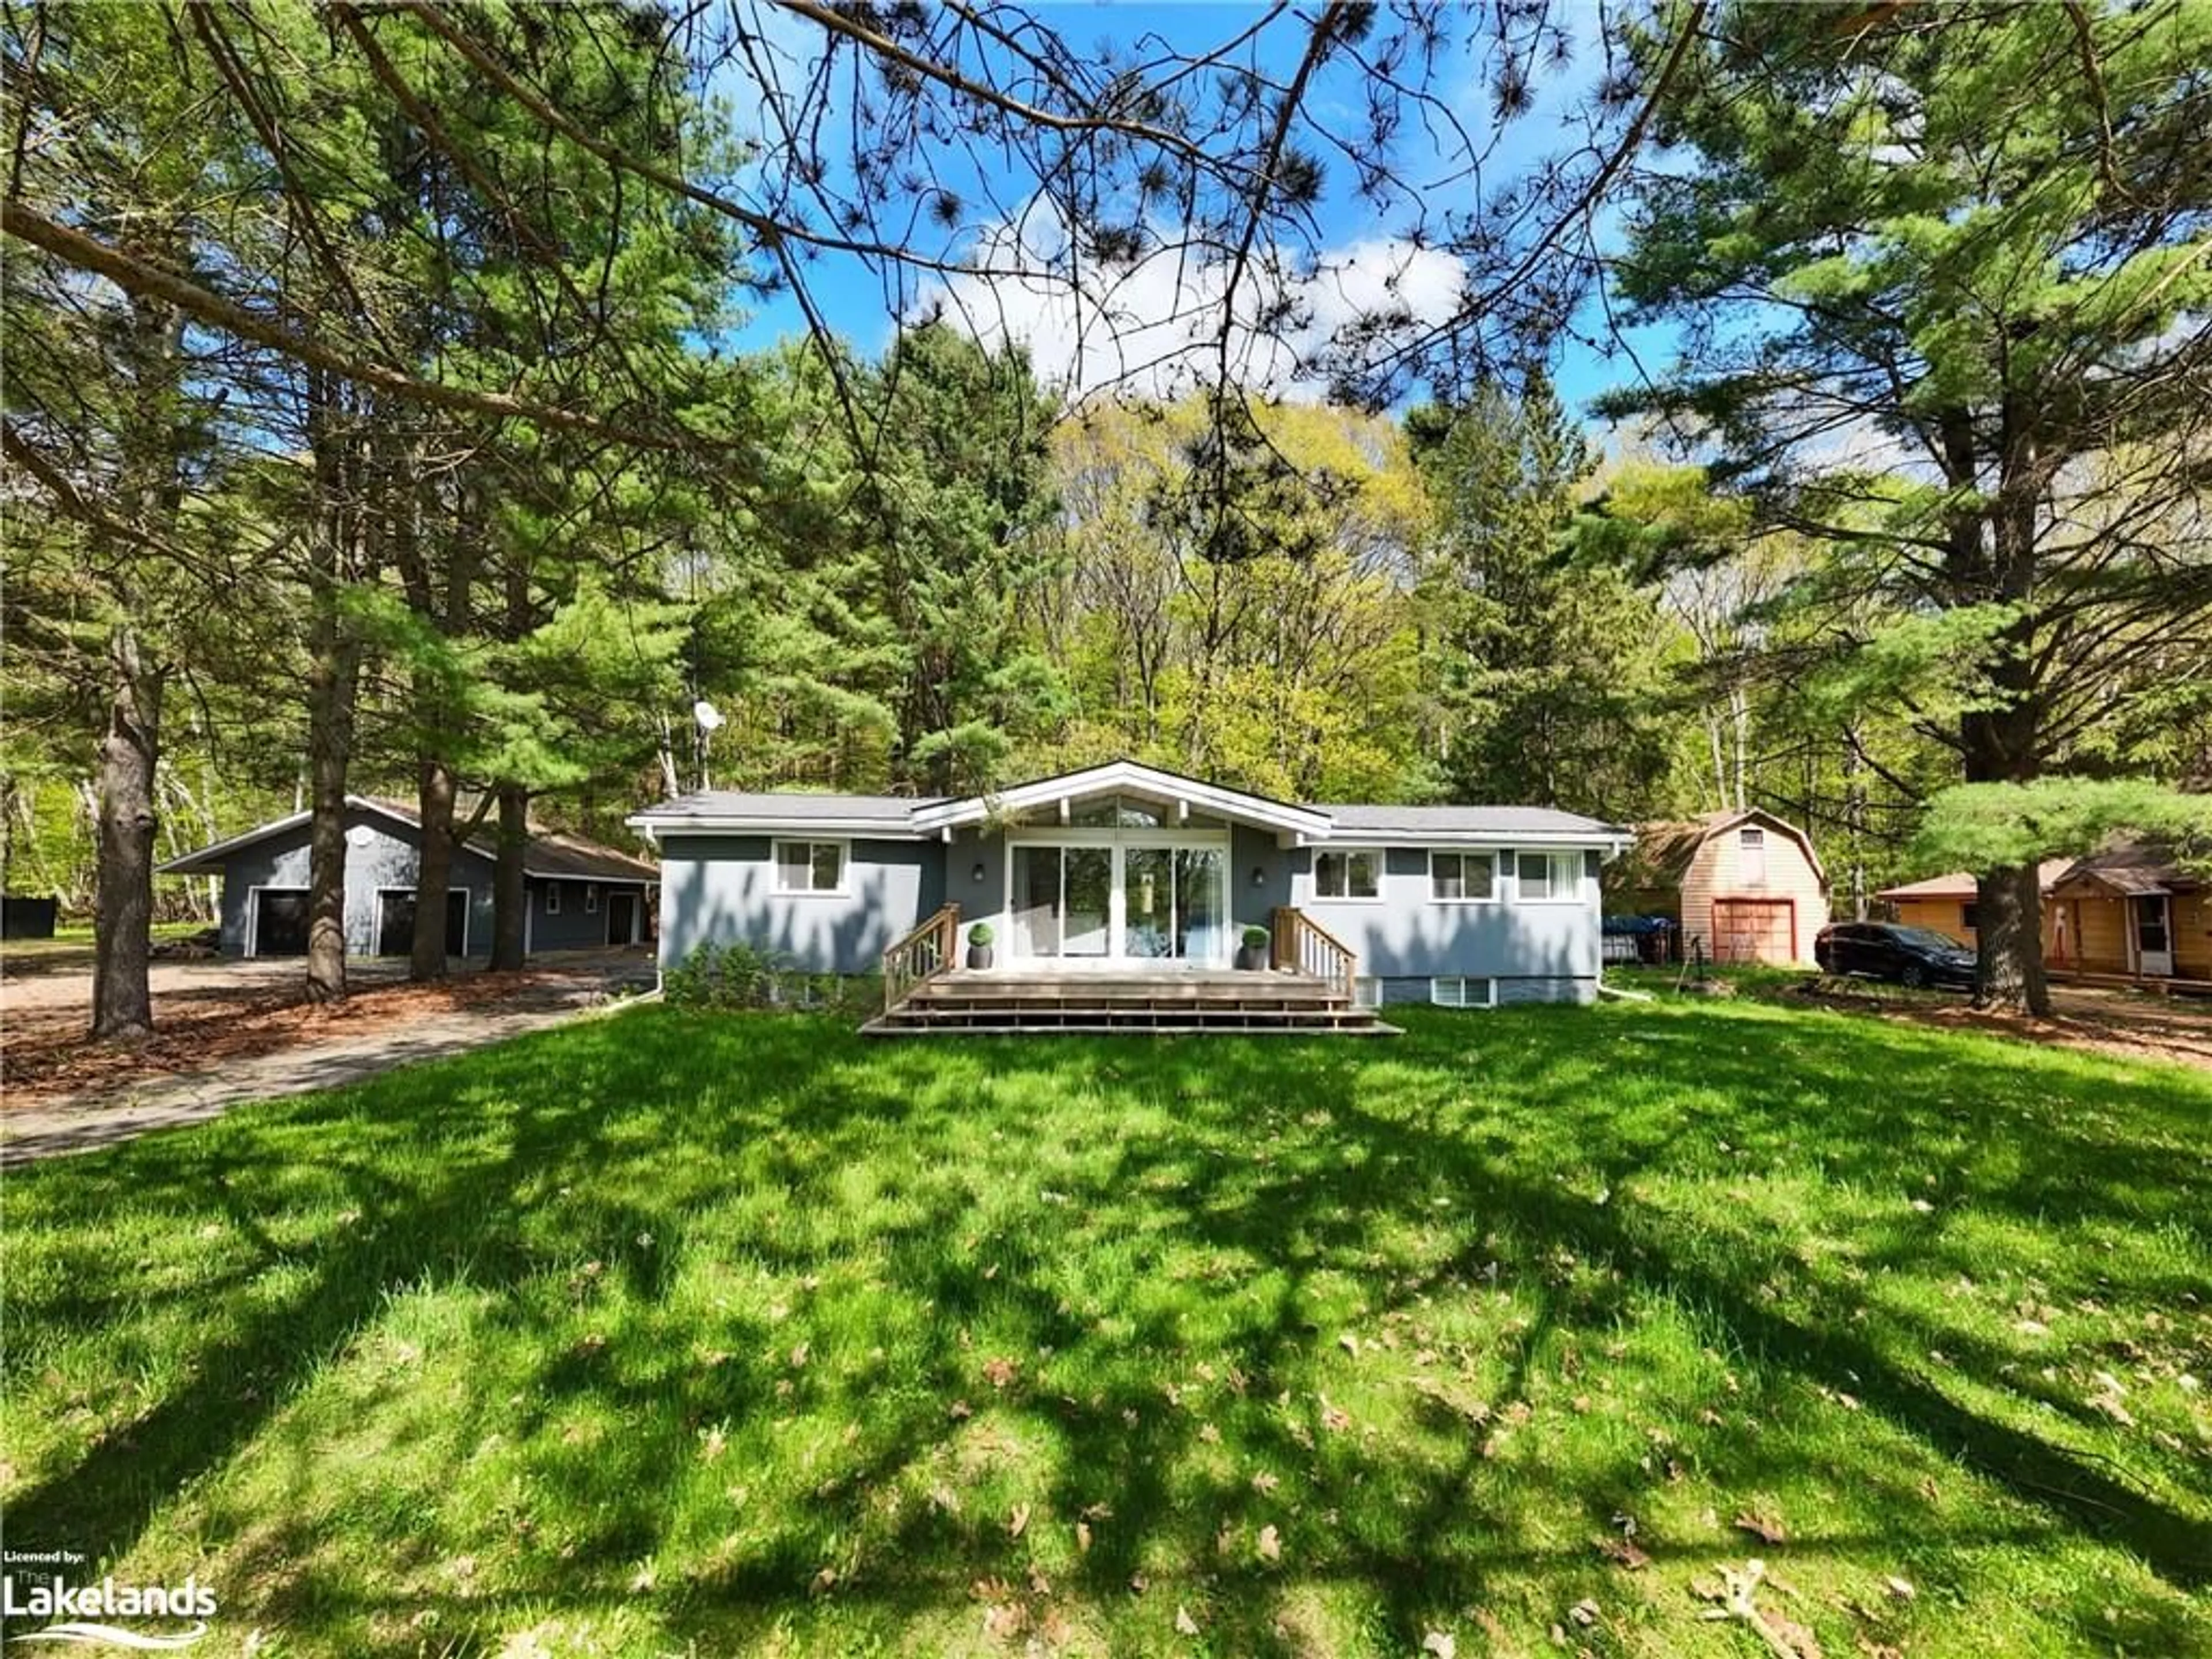 Cottage for 1517 Fox Point Rd, Lake of Bays (Twp) Ontario P0A 1H0